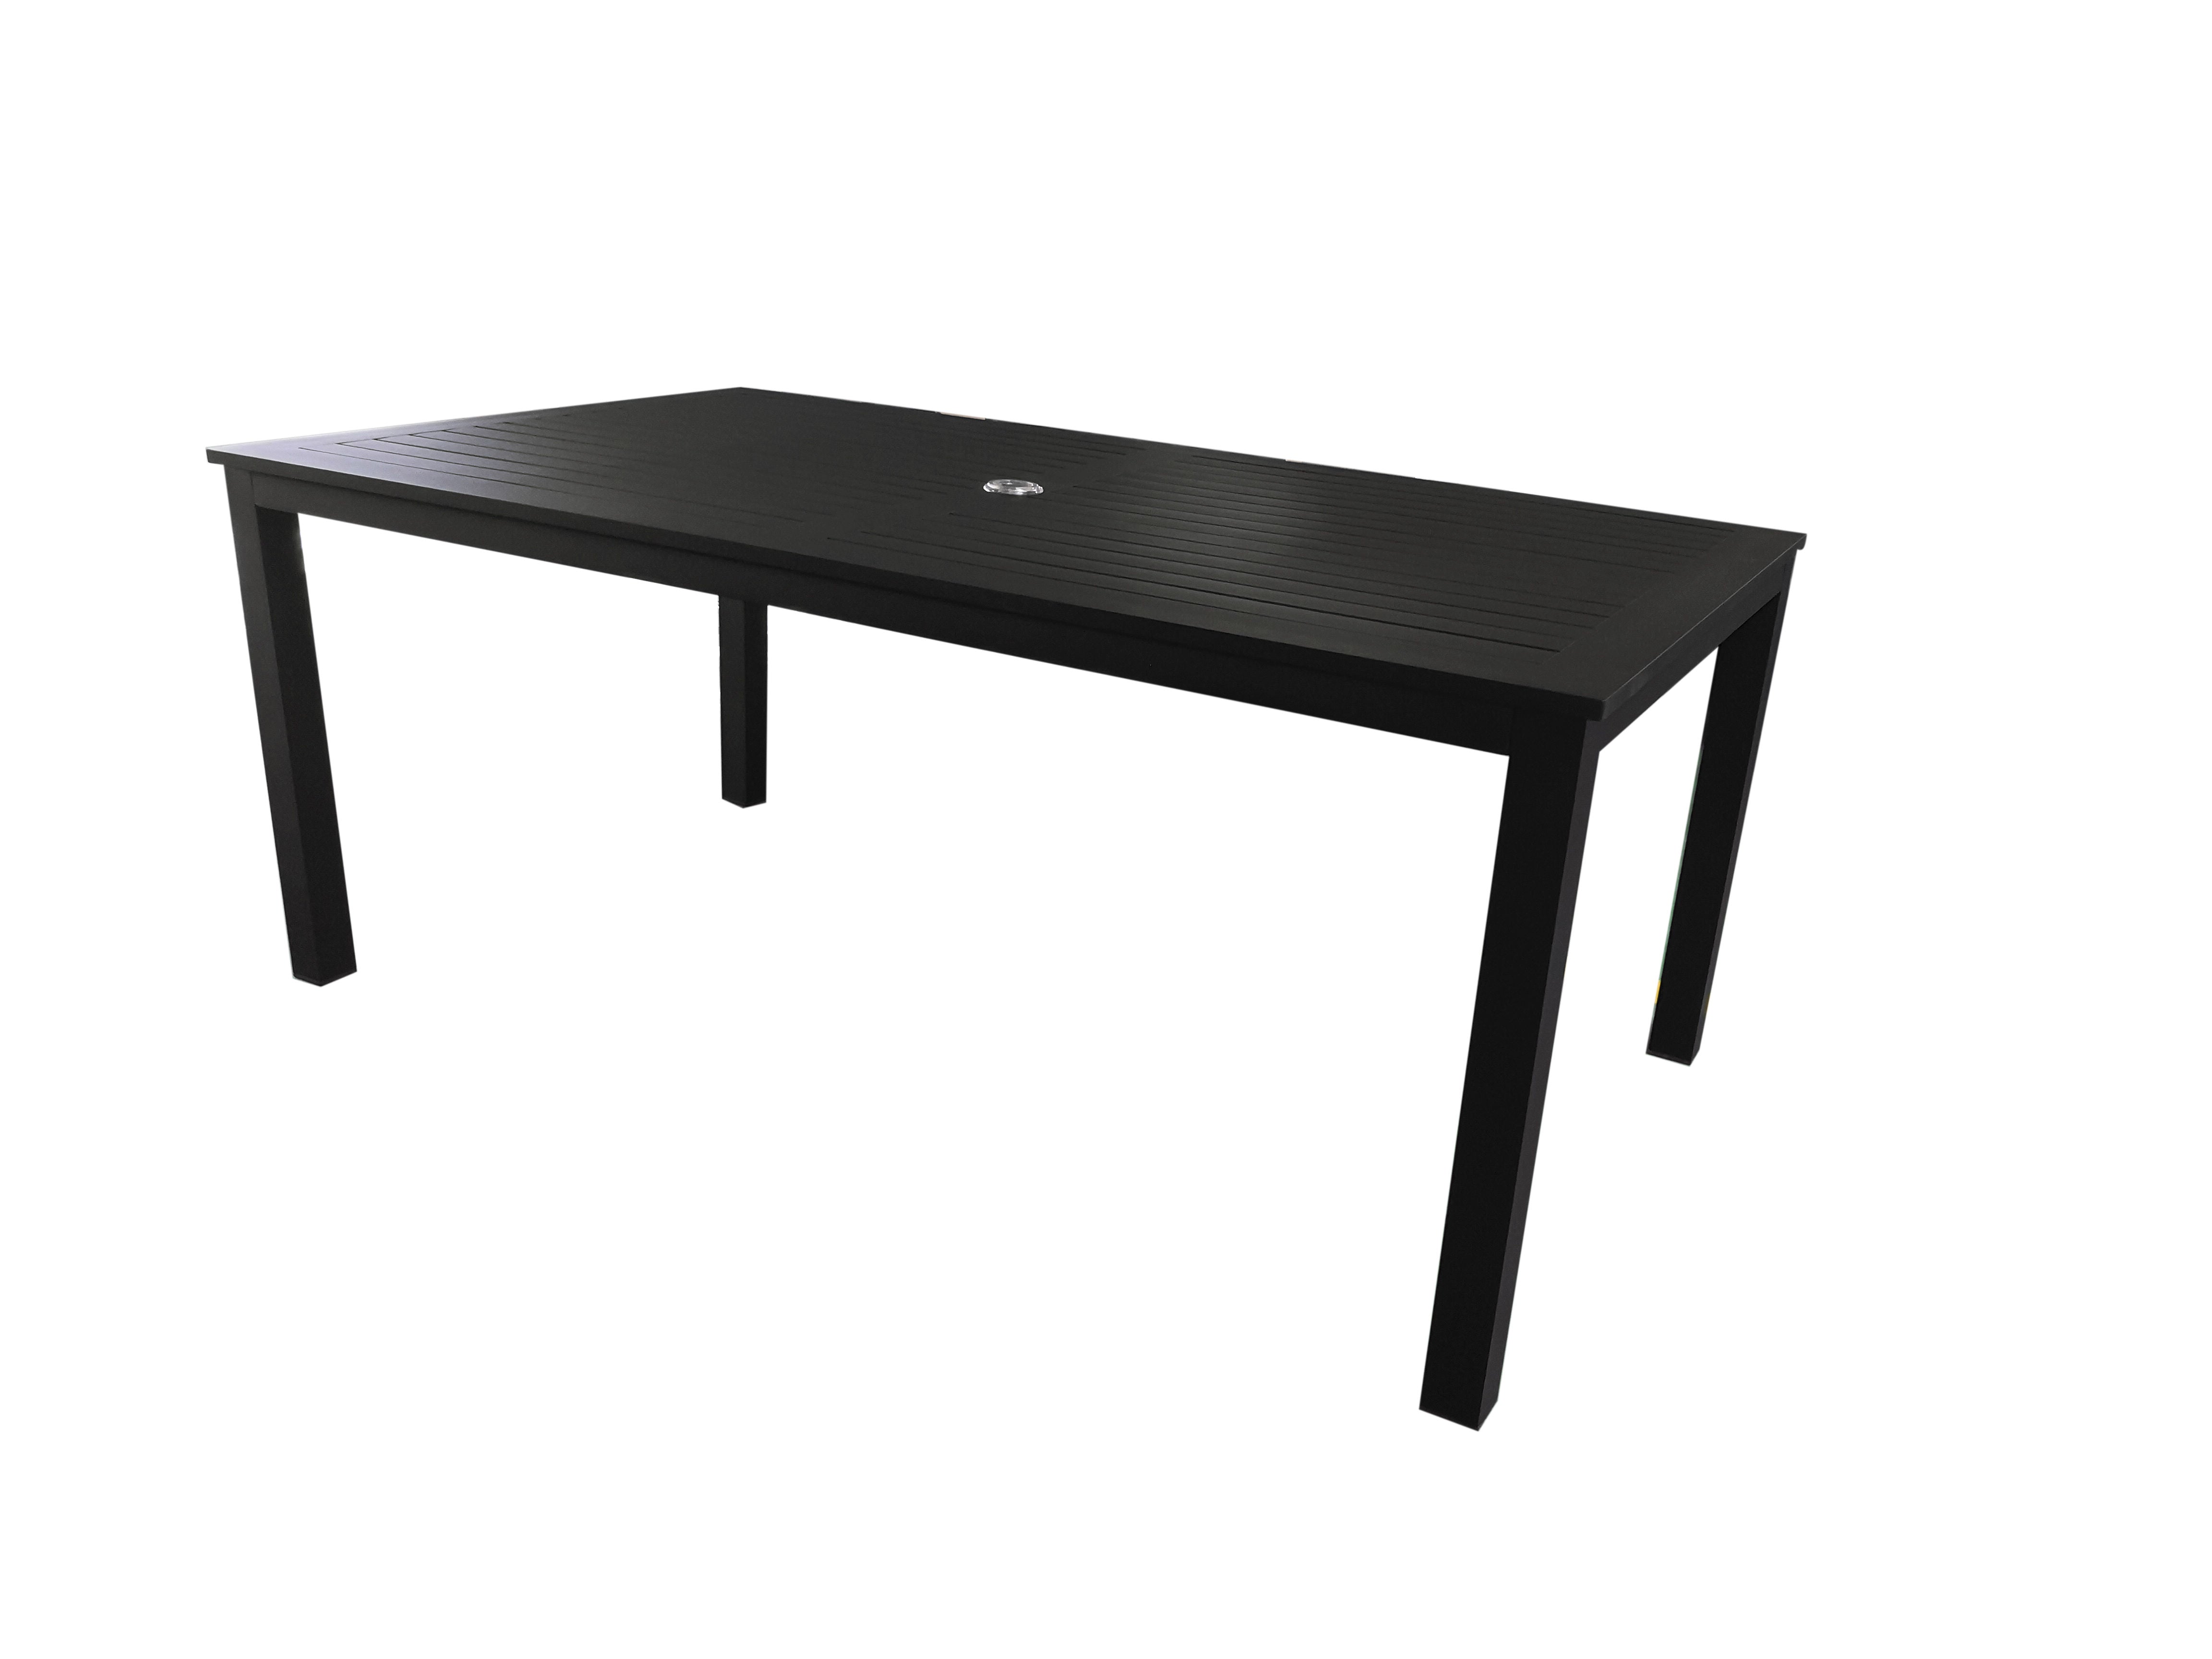 PatioZone Dining Table with Slated Tabletop w/Umbrella Hole in Middle and Aluminum Frame (MOSS-T304N) - Matte Black